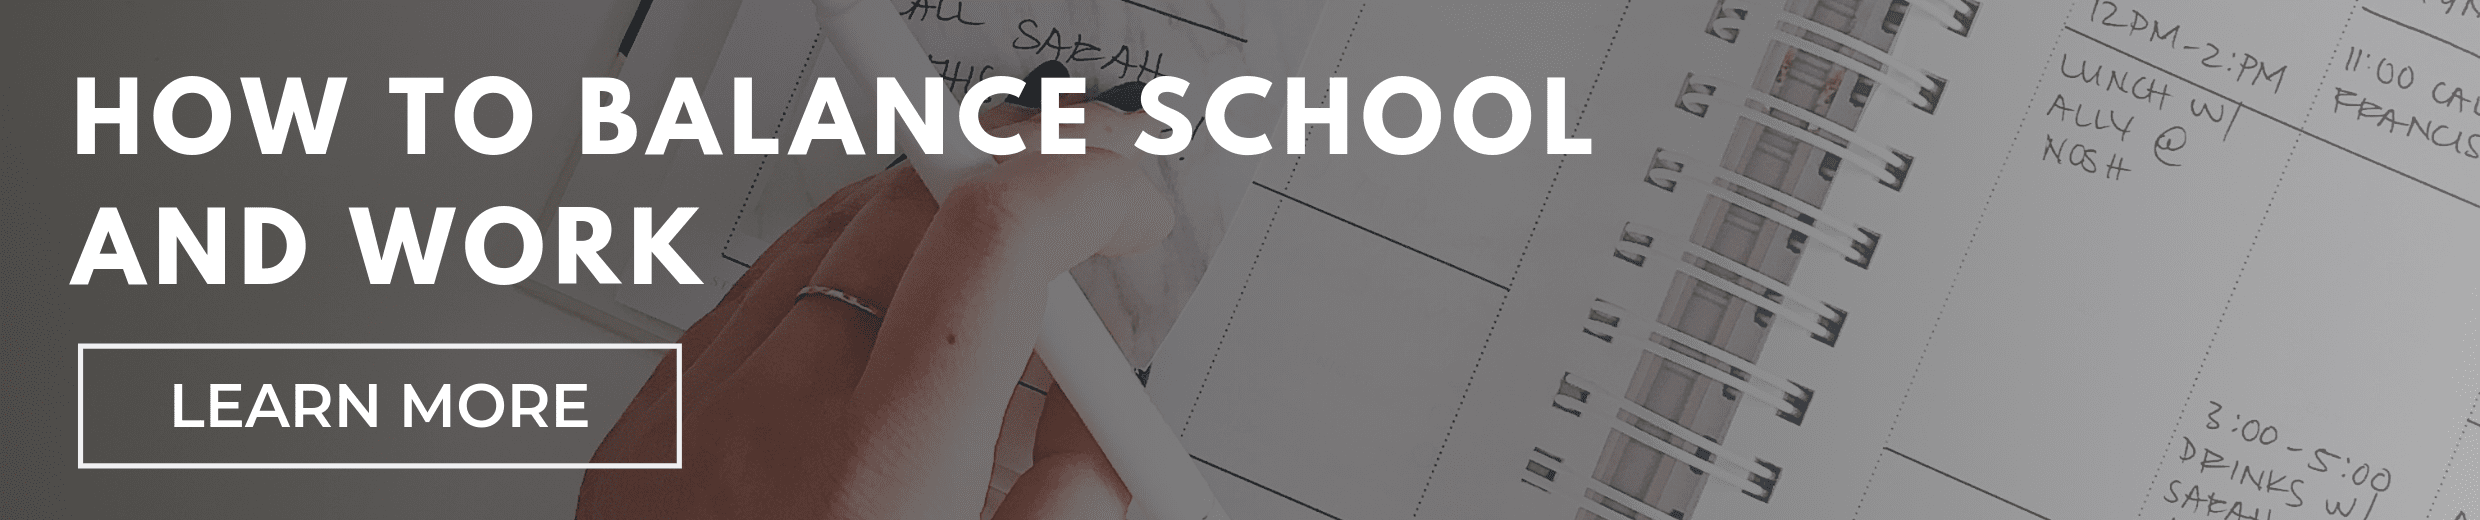 7 Tips to Help You Balance School and Work